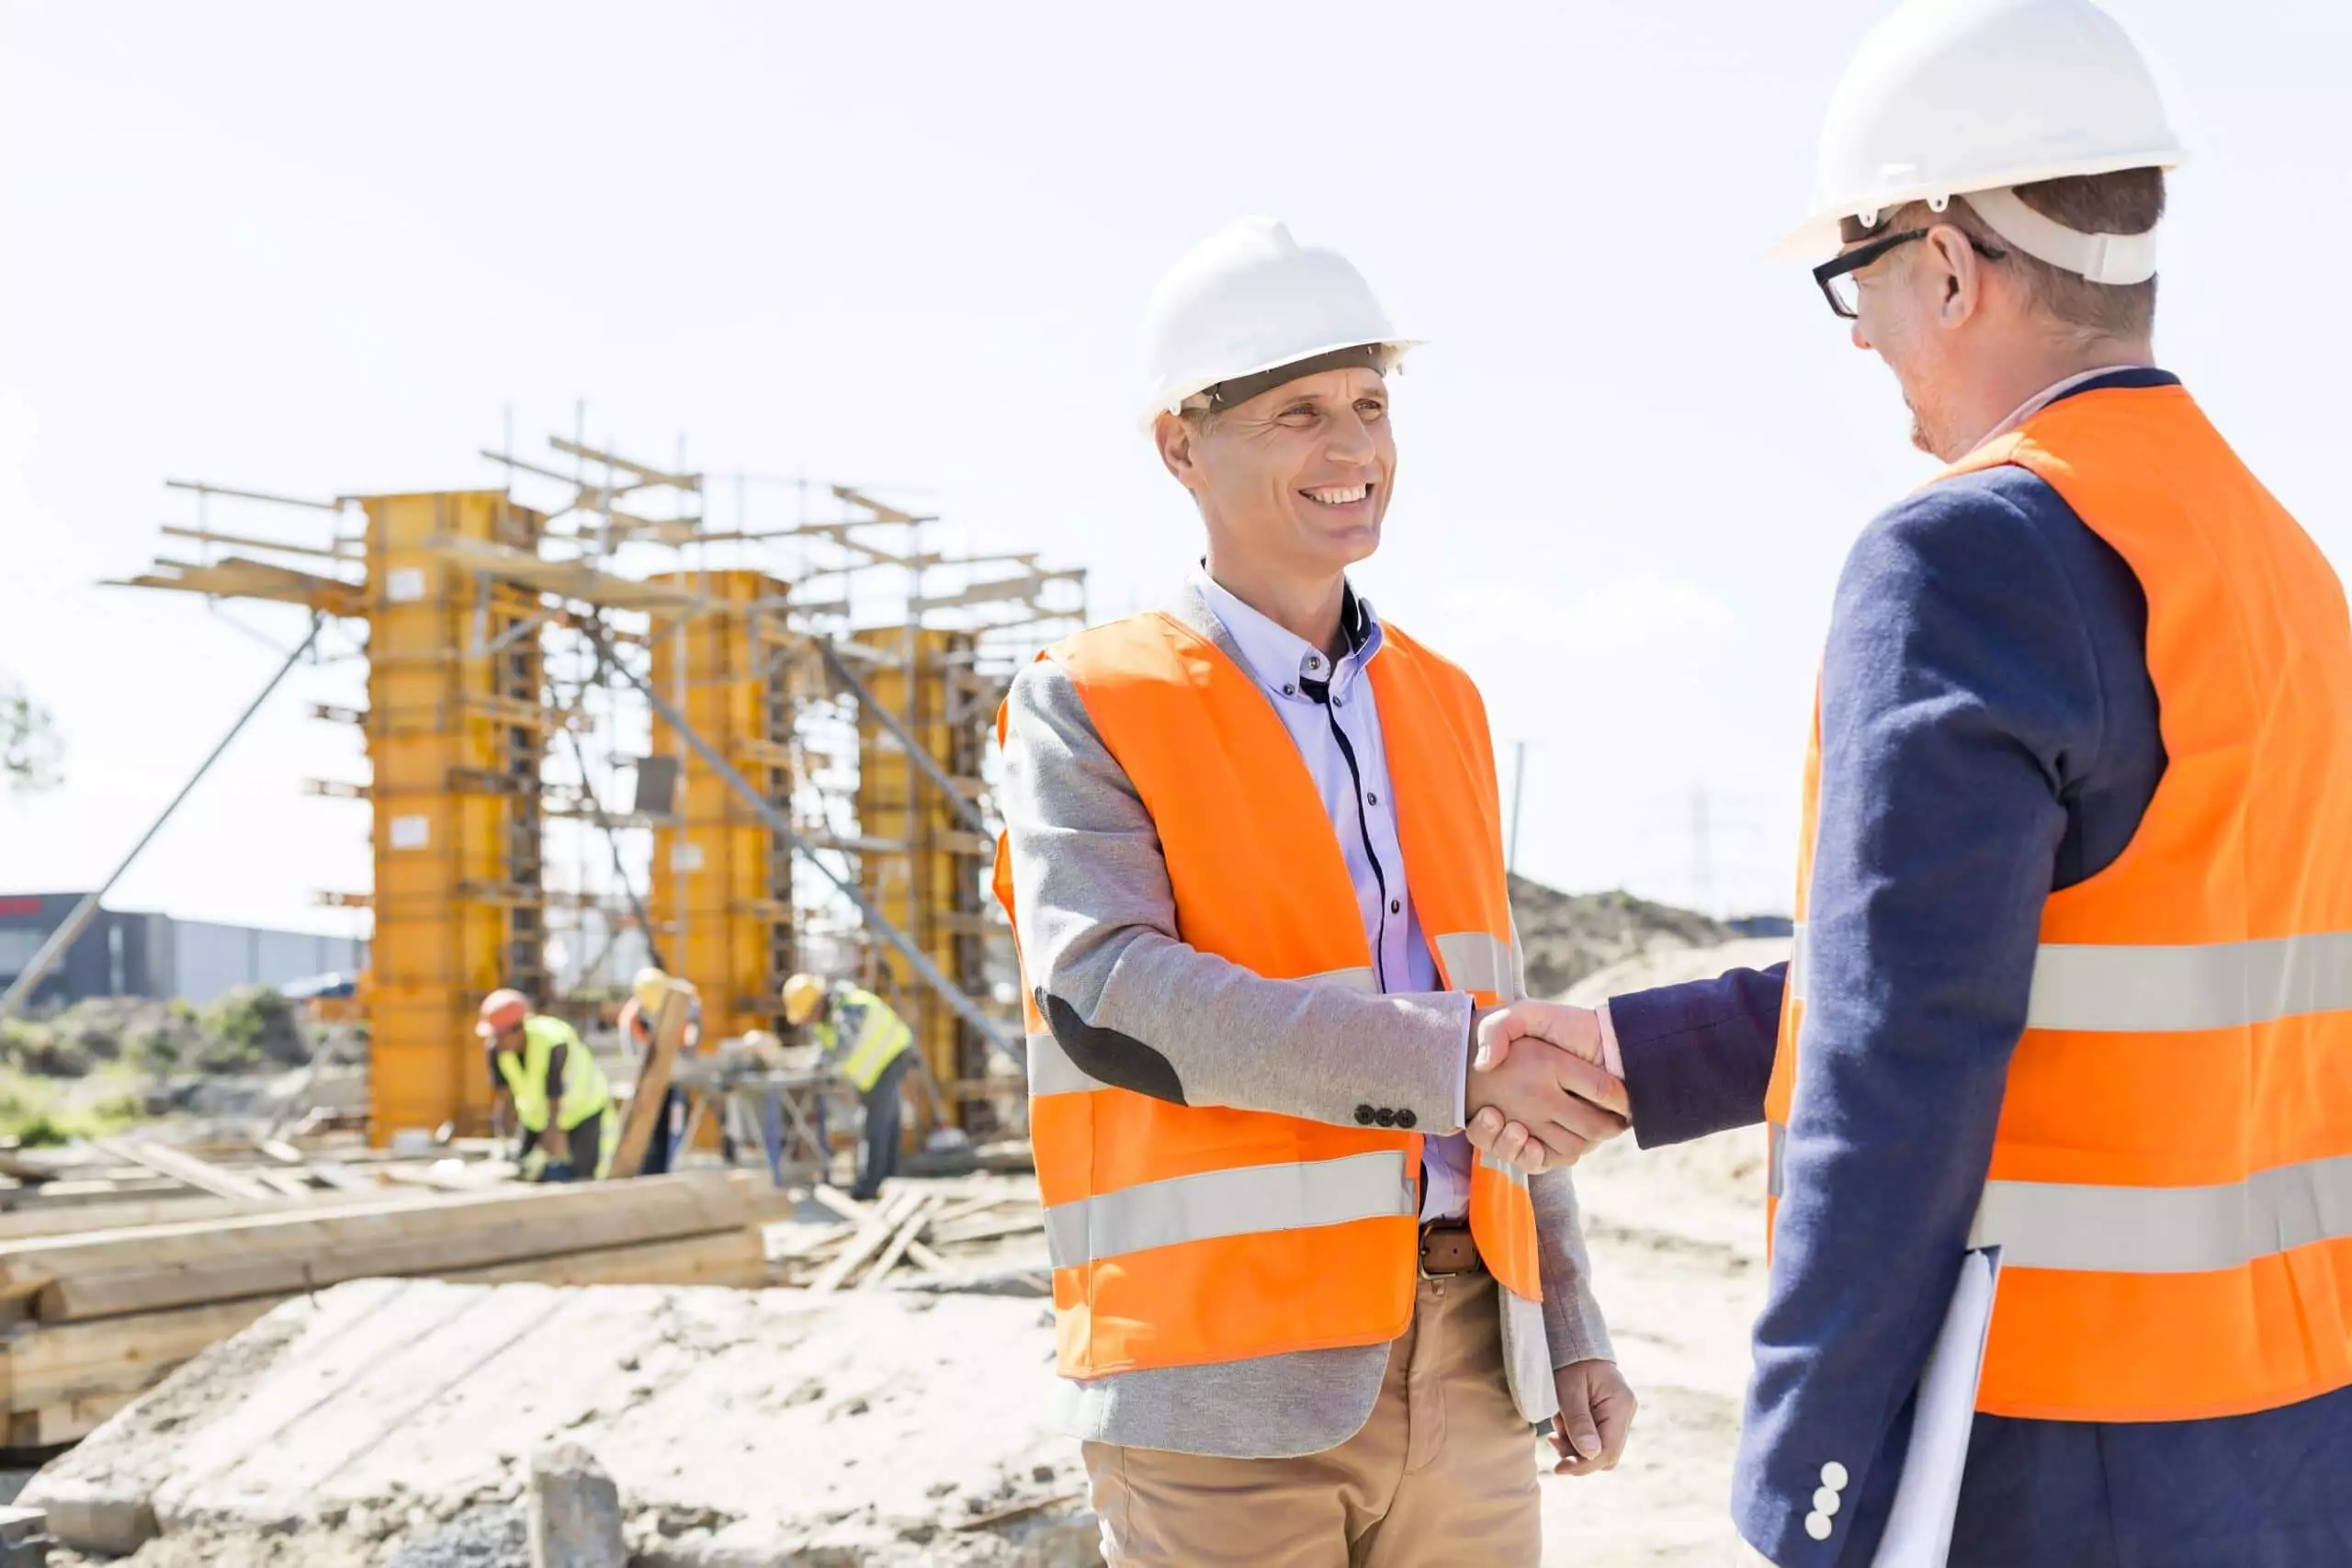 tradie shaking hands at construction for qbcc licence